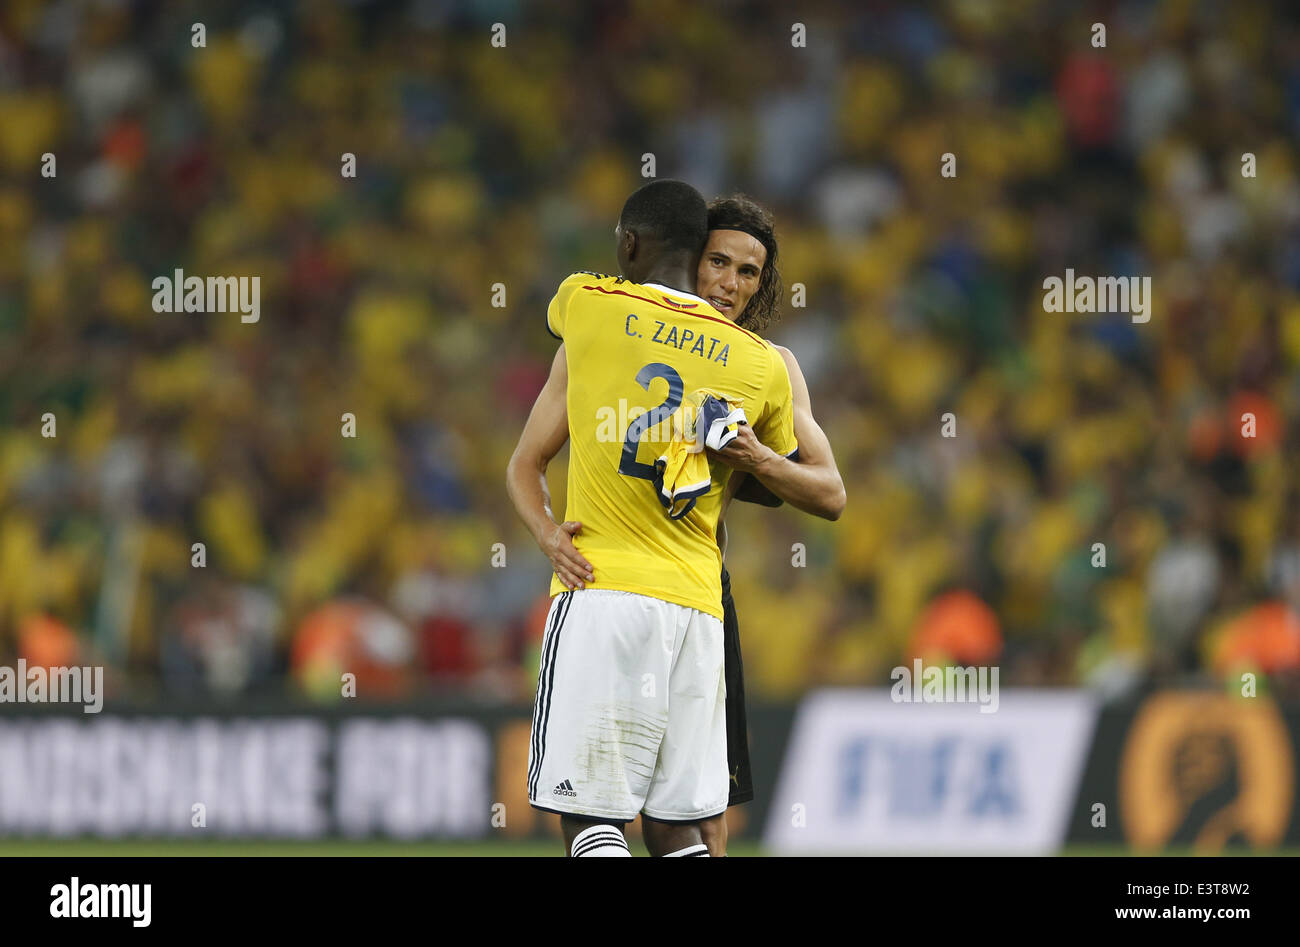 Rio De Janeiro, Brazil. 28th June, 2014. Colombia's Cristian Zapata (front) comforts Uruguay's Edinson Cavani after a Round of 16 match between Colombia and Uruguay of 2014 FIFA World Cup at the Estadio do Maracana Stadium in Rio de Janeiro, Brazil, on June 28, 2014. Colombia won 2-0 over Uruguay and qualified for Quarter-finals on Saturday. Credit:  Wang Lili/Xinhua/Alamy Live News Stock Photo